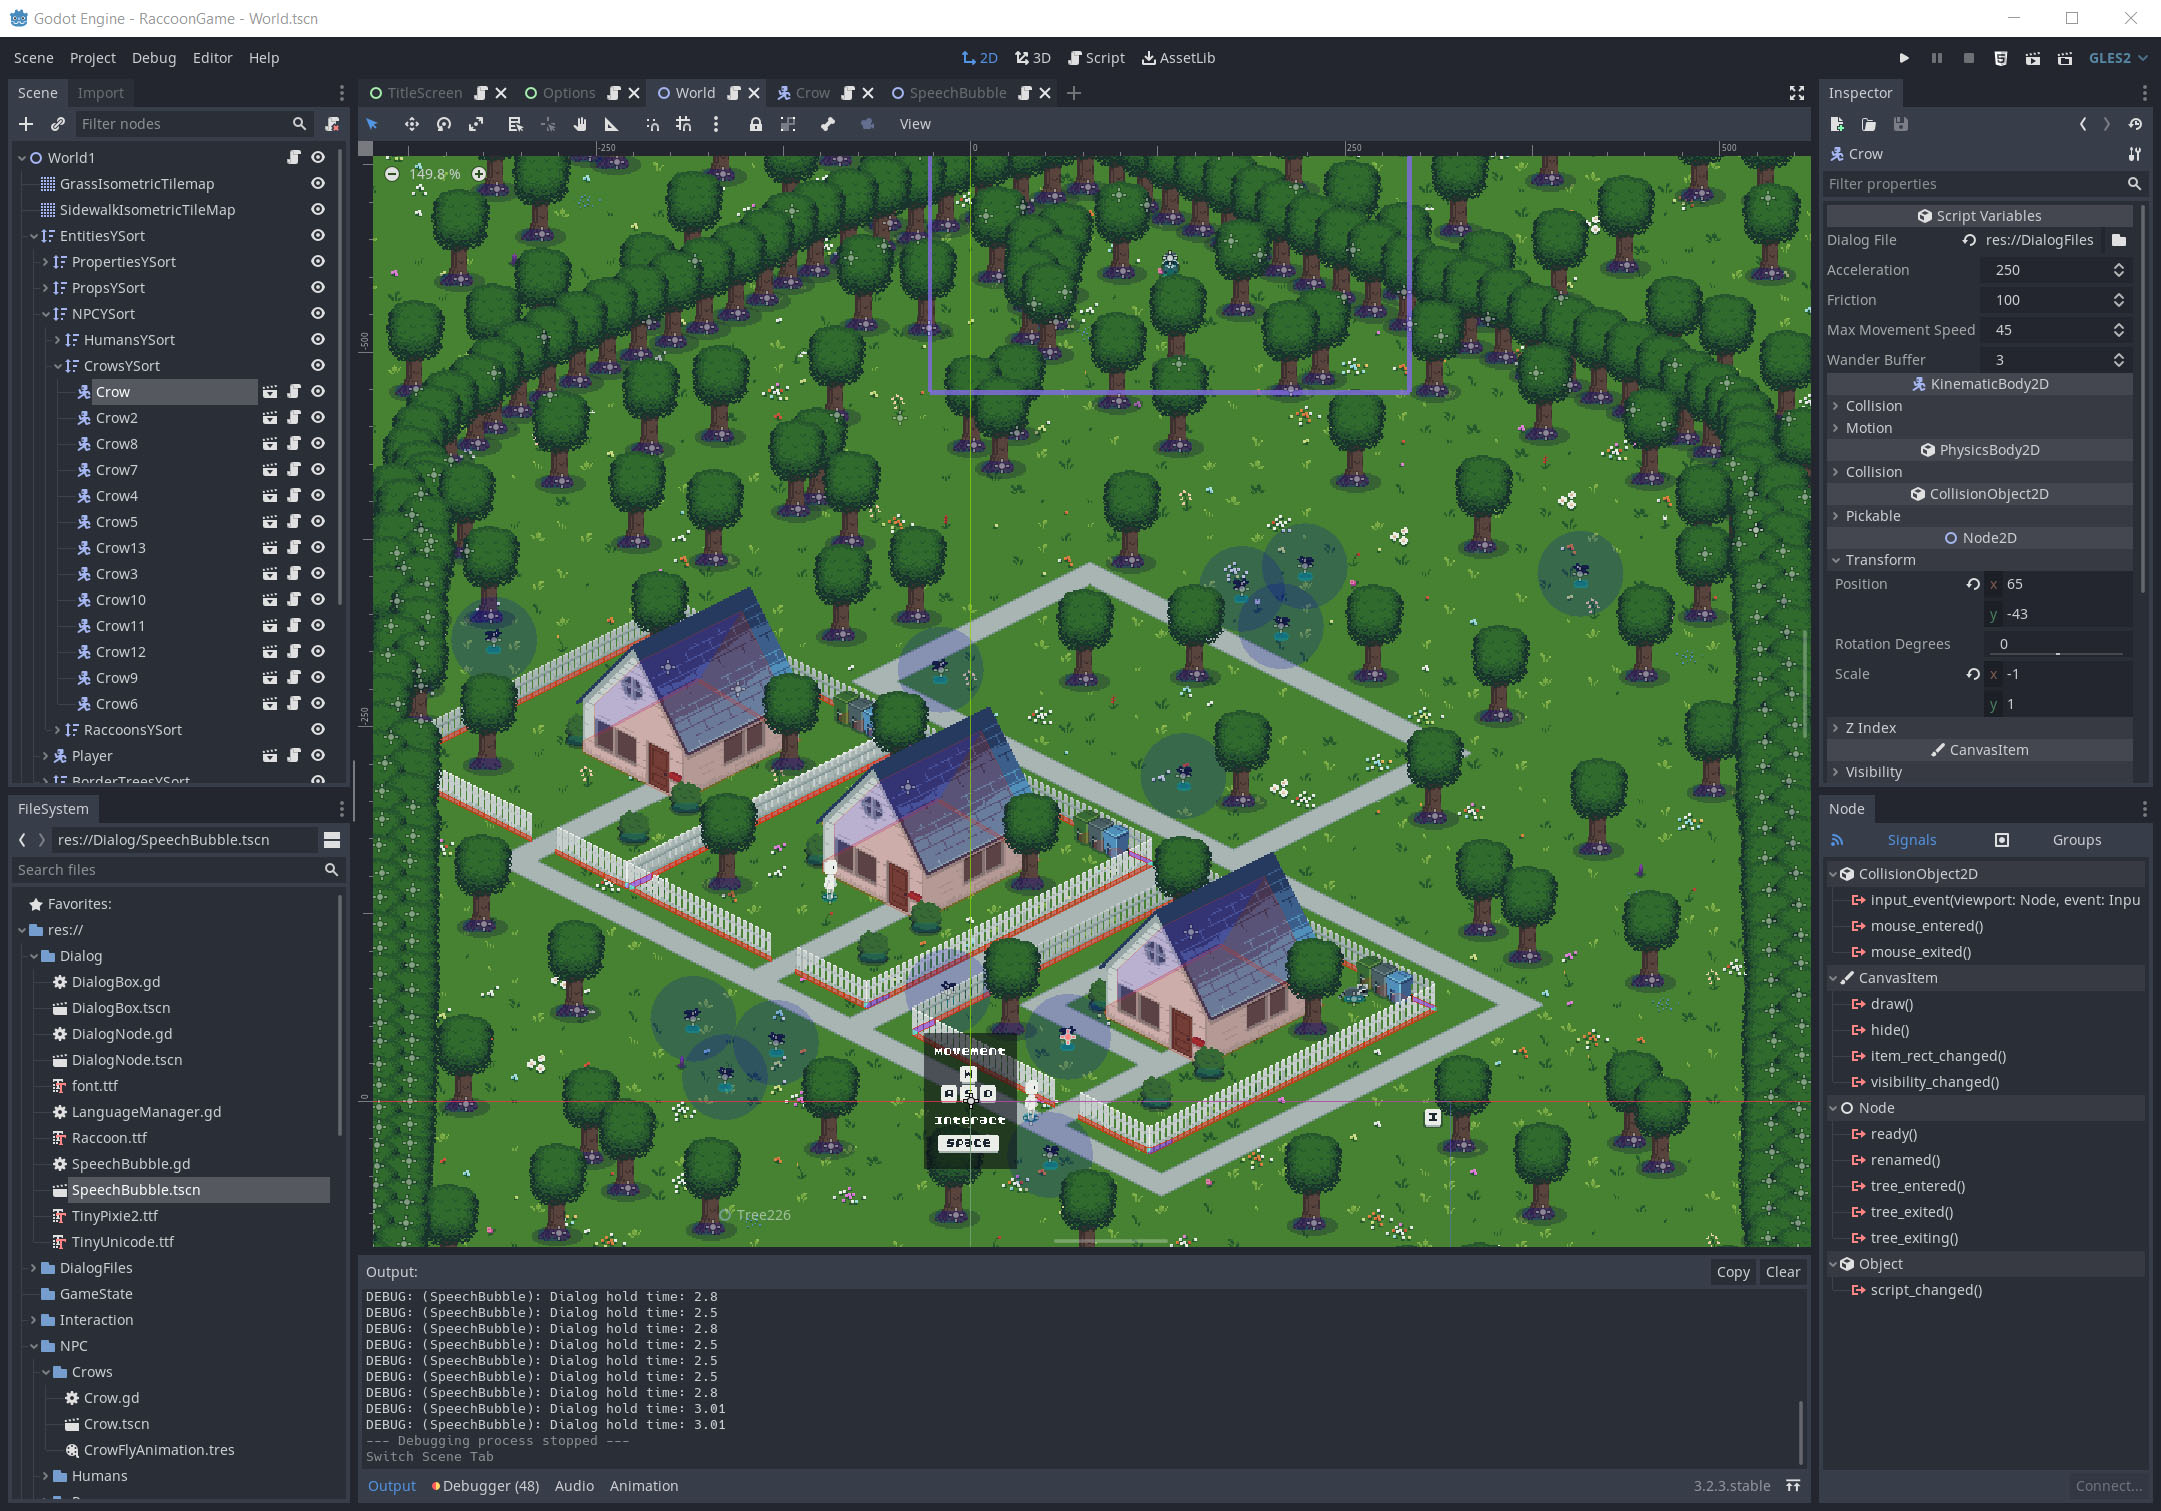 The Godot editor showing a sample scene in the middle and all the menus and options around the perimeter